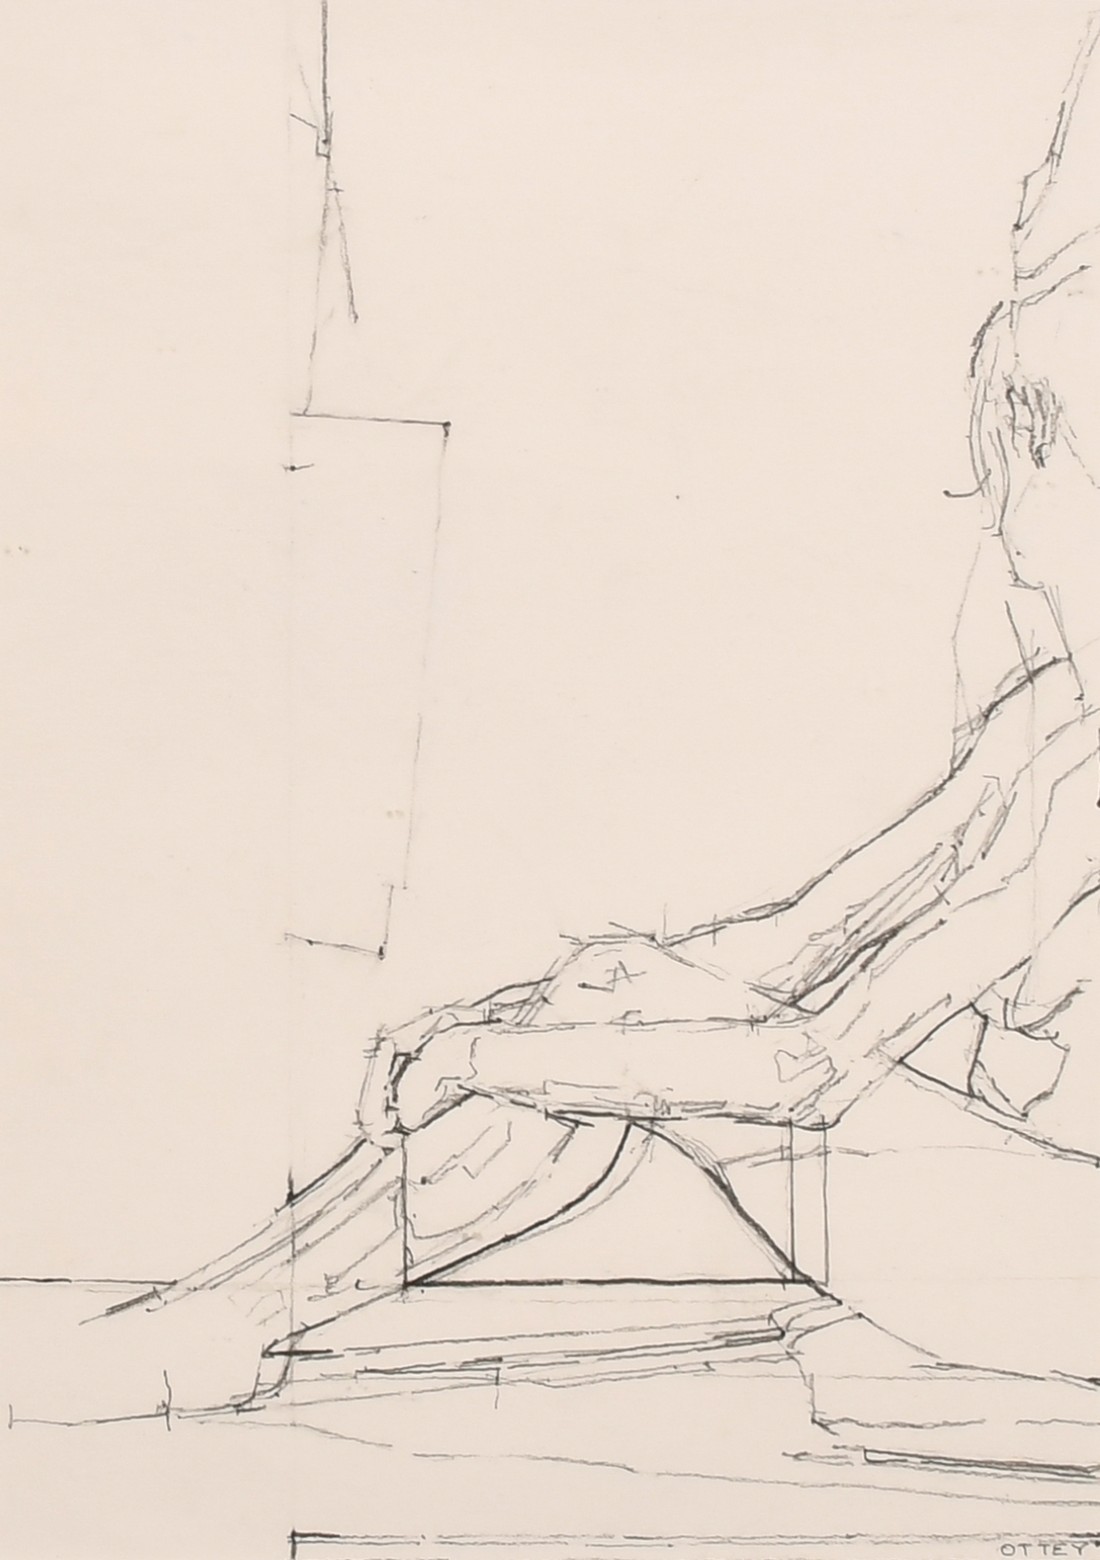 Piers Ottey (20th Century), two charcoal life drawings, one 13" x 9" (33 x 23cm), the other 8" x